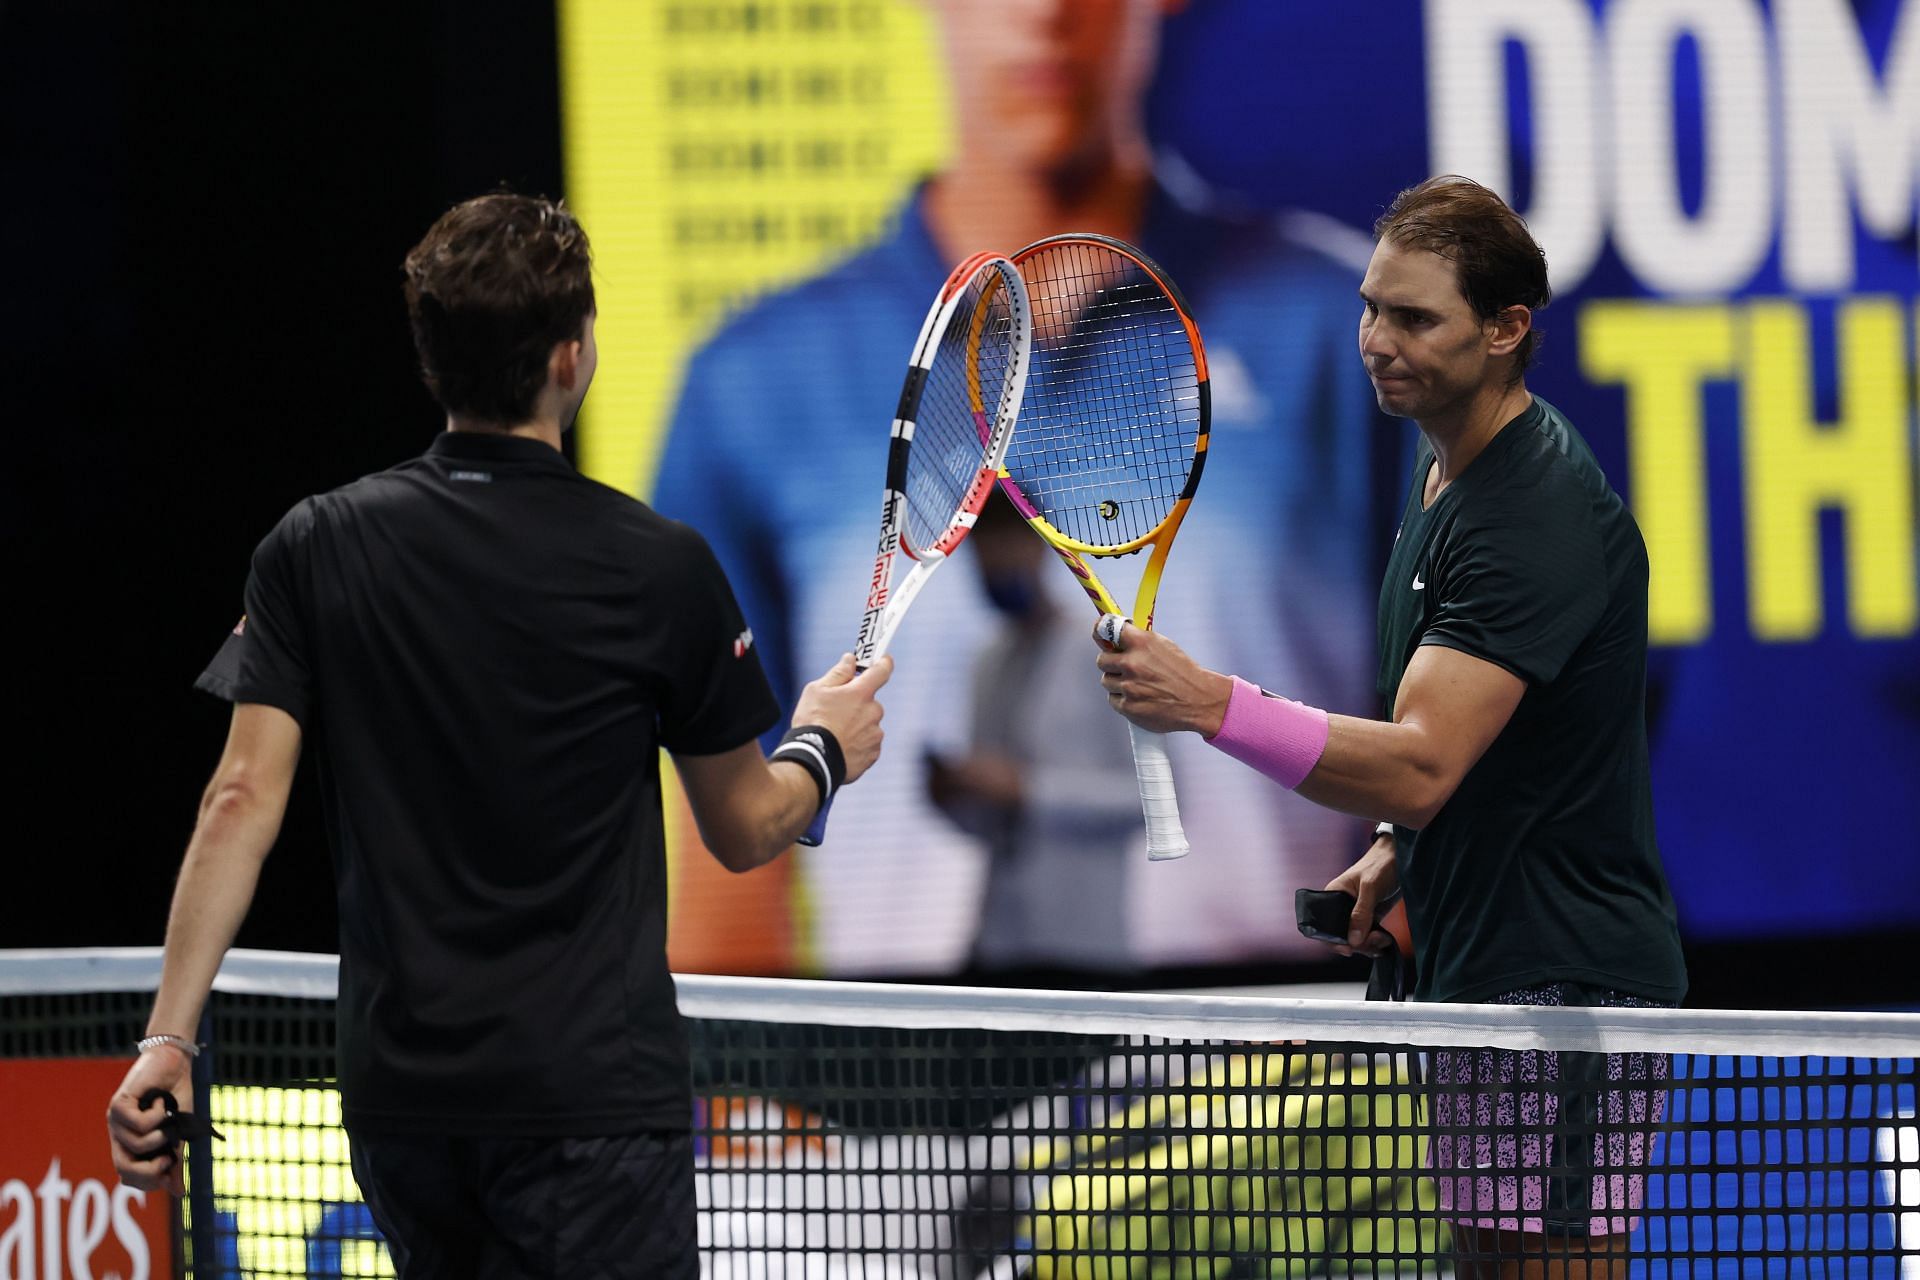 Rafael Nadal and Dominic Thiem after their match at the 2020 ATP Finals